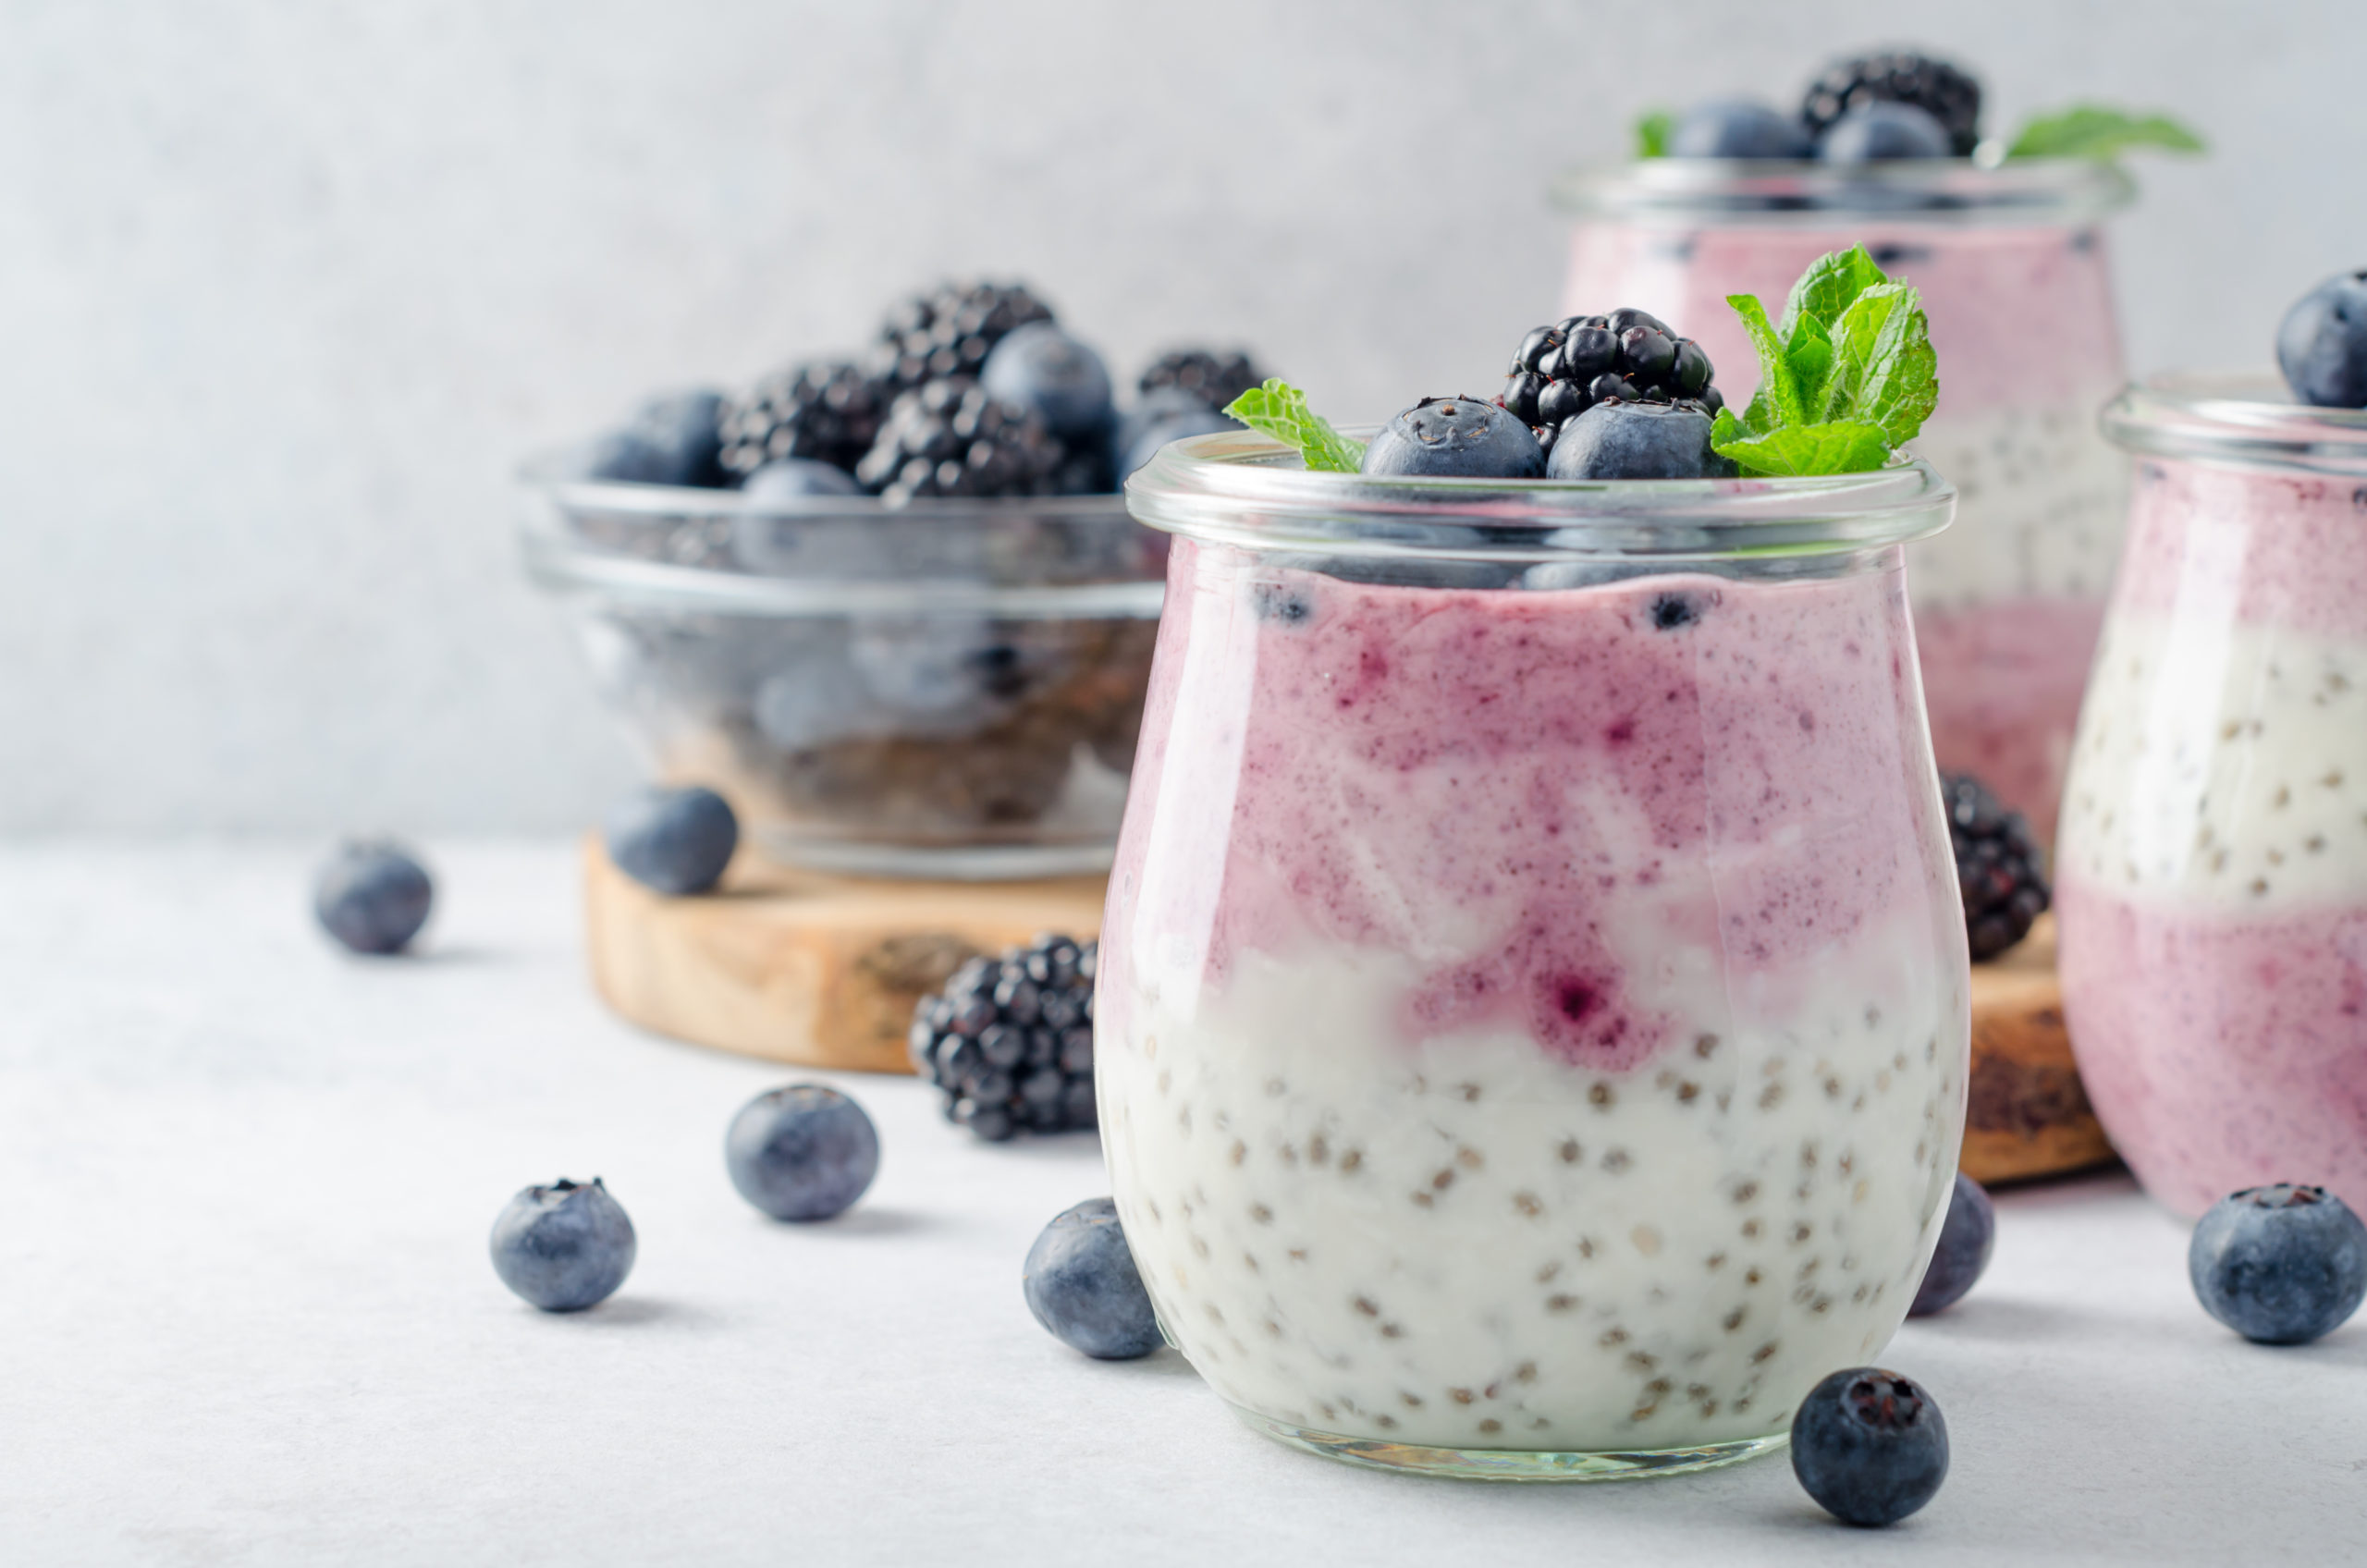 5 Reasons why Chia seeds can improve your health.